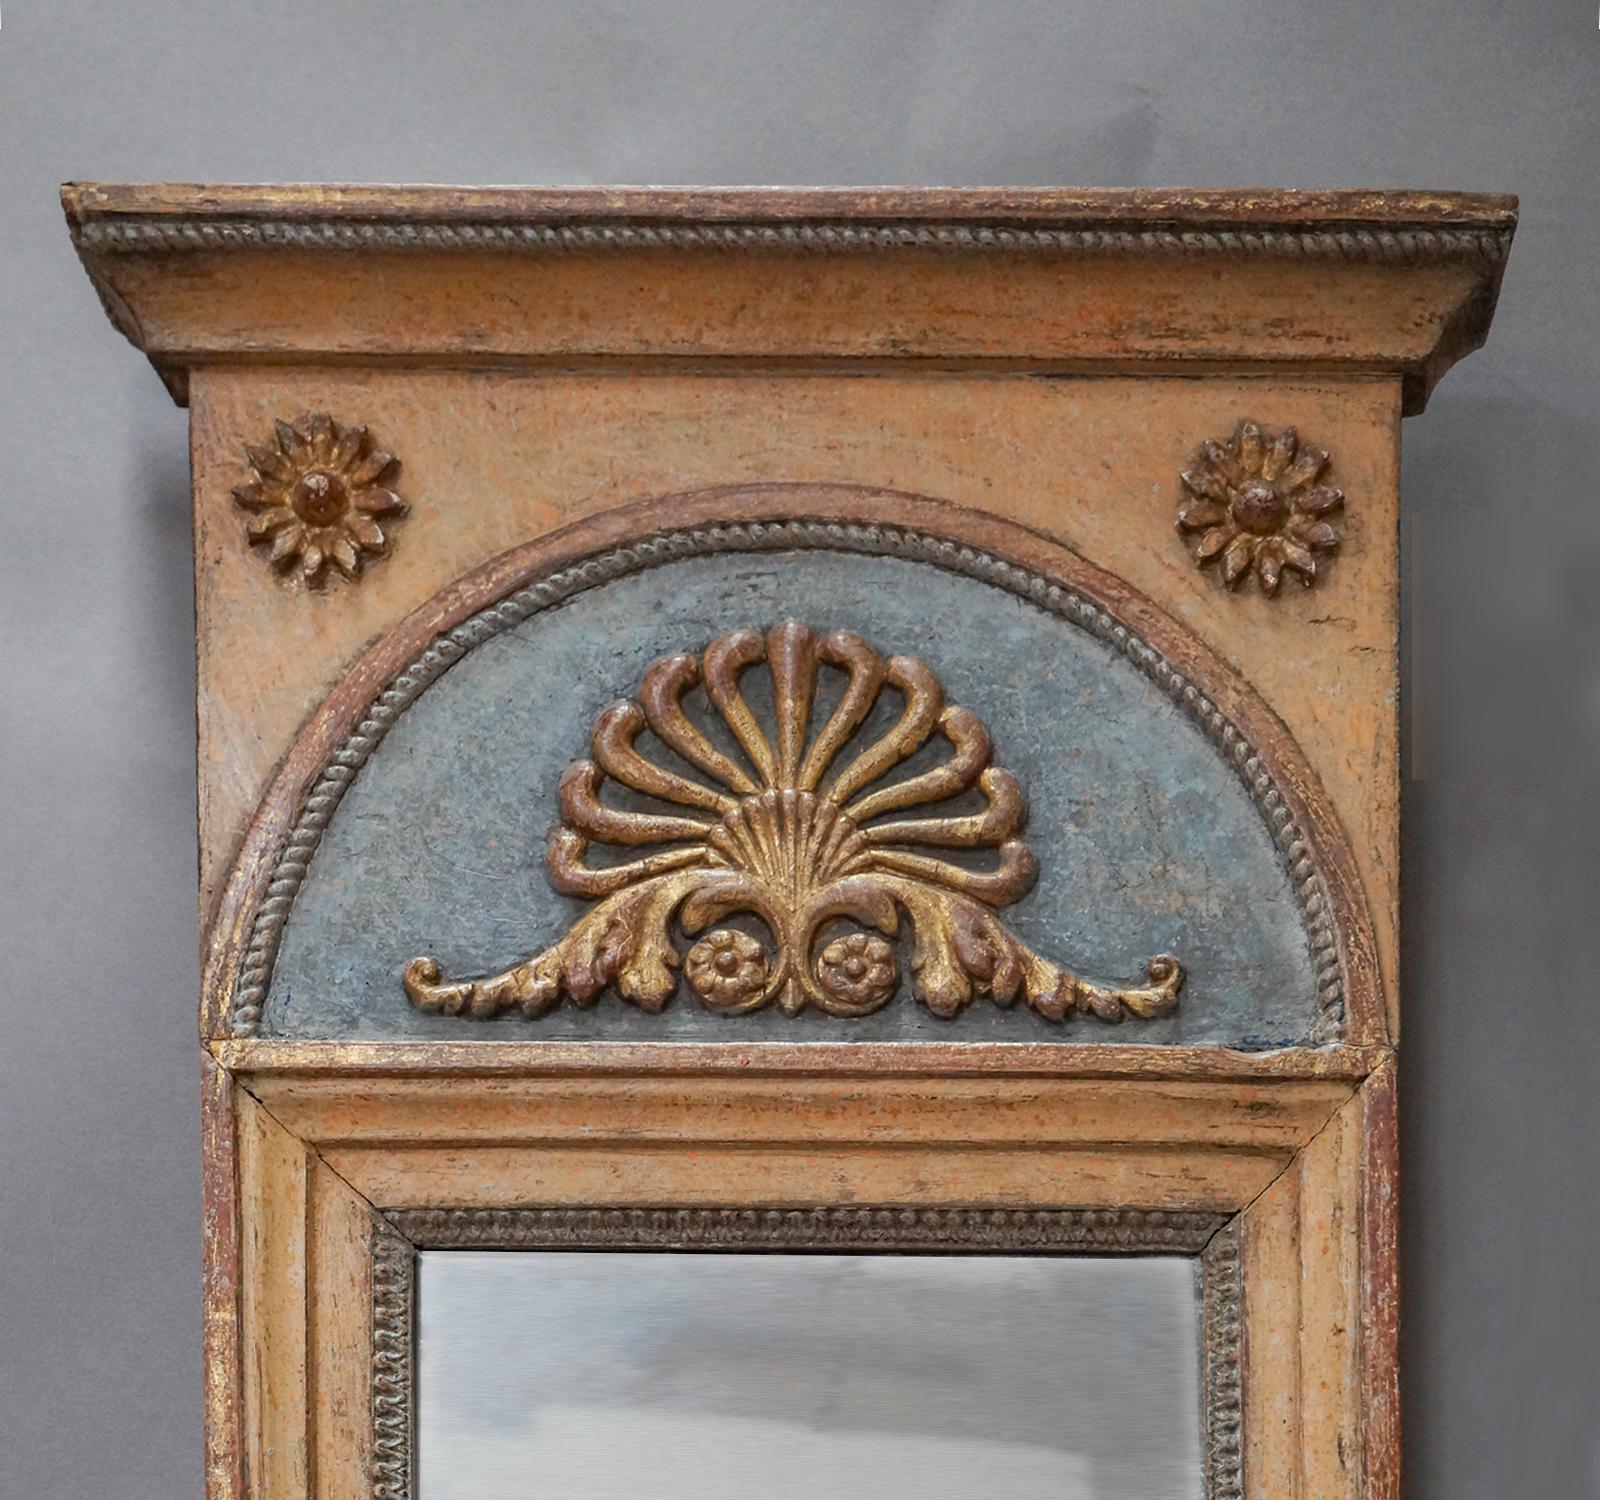 Pair of small Swedish mirrors from the Gustavian period, circa 1820. Original painted and gilded surface with a beautifully formed palmette above the mirror. Original mirror glass and back.